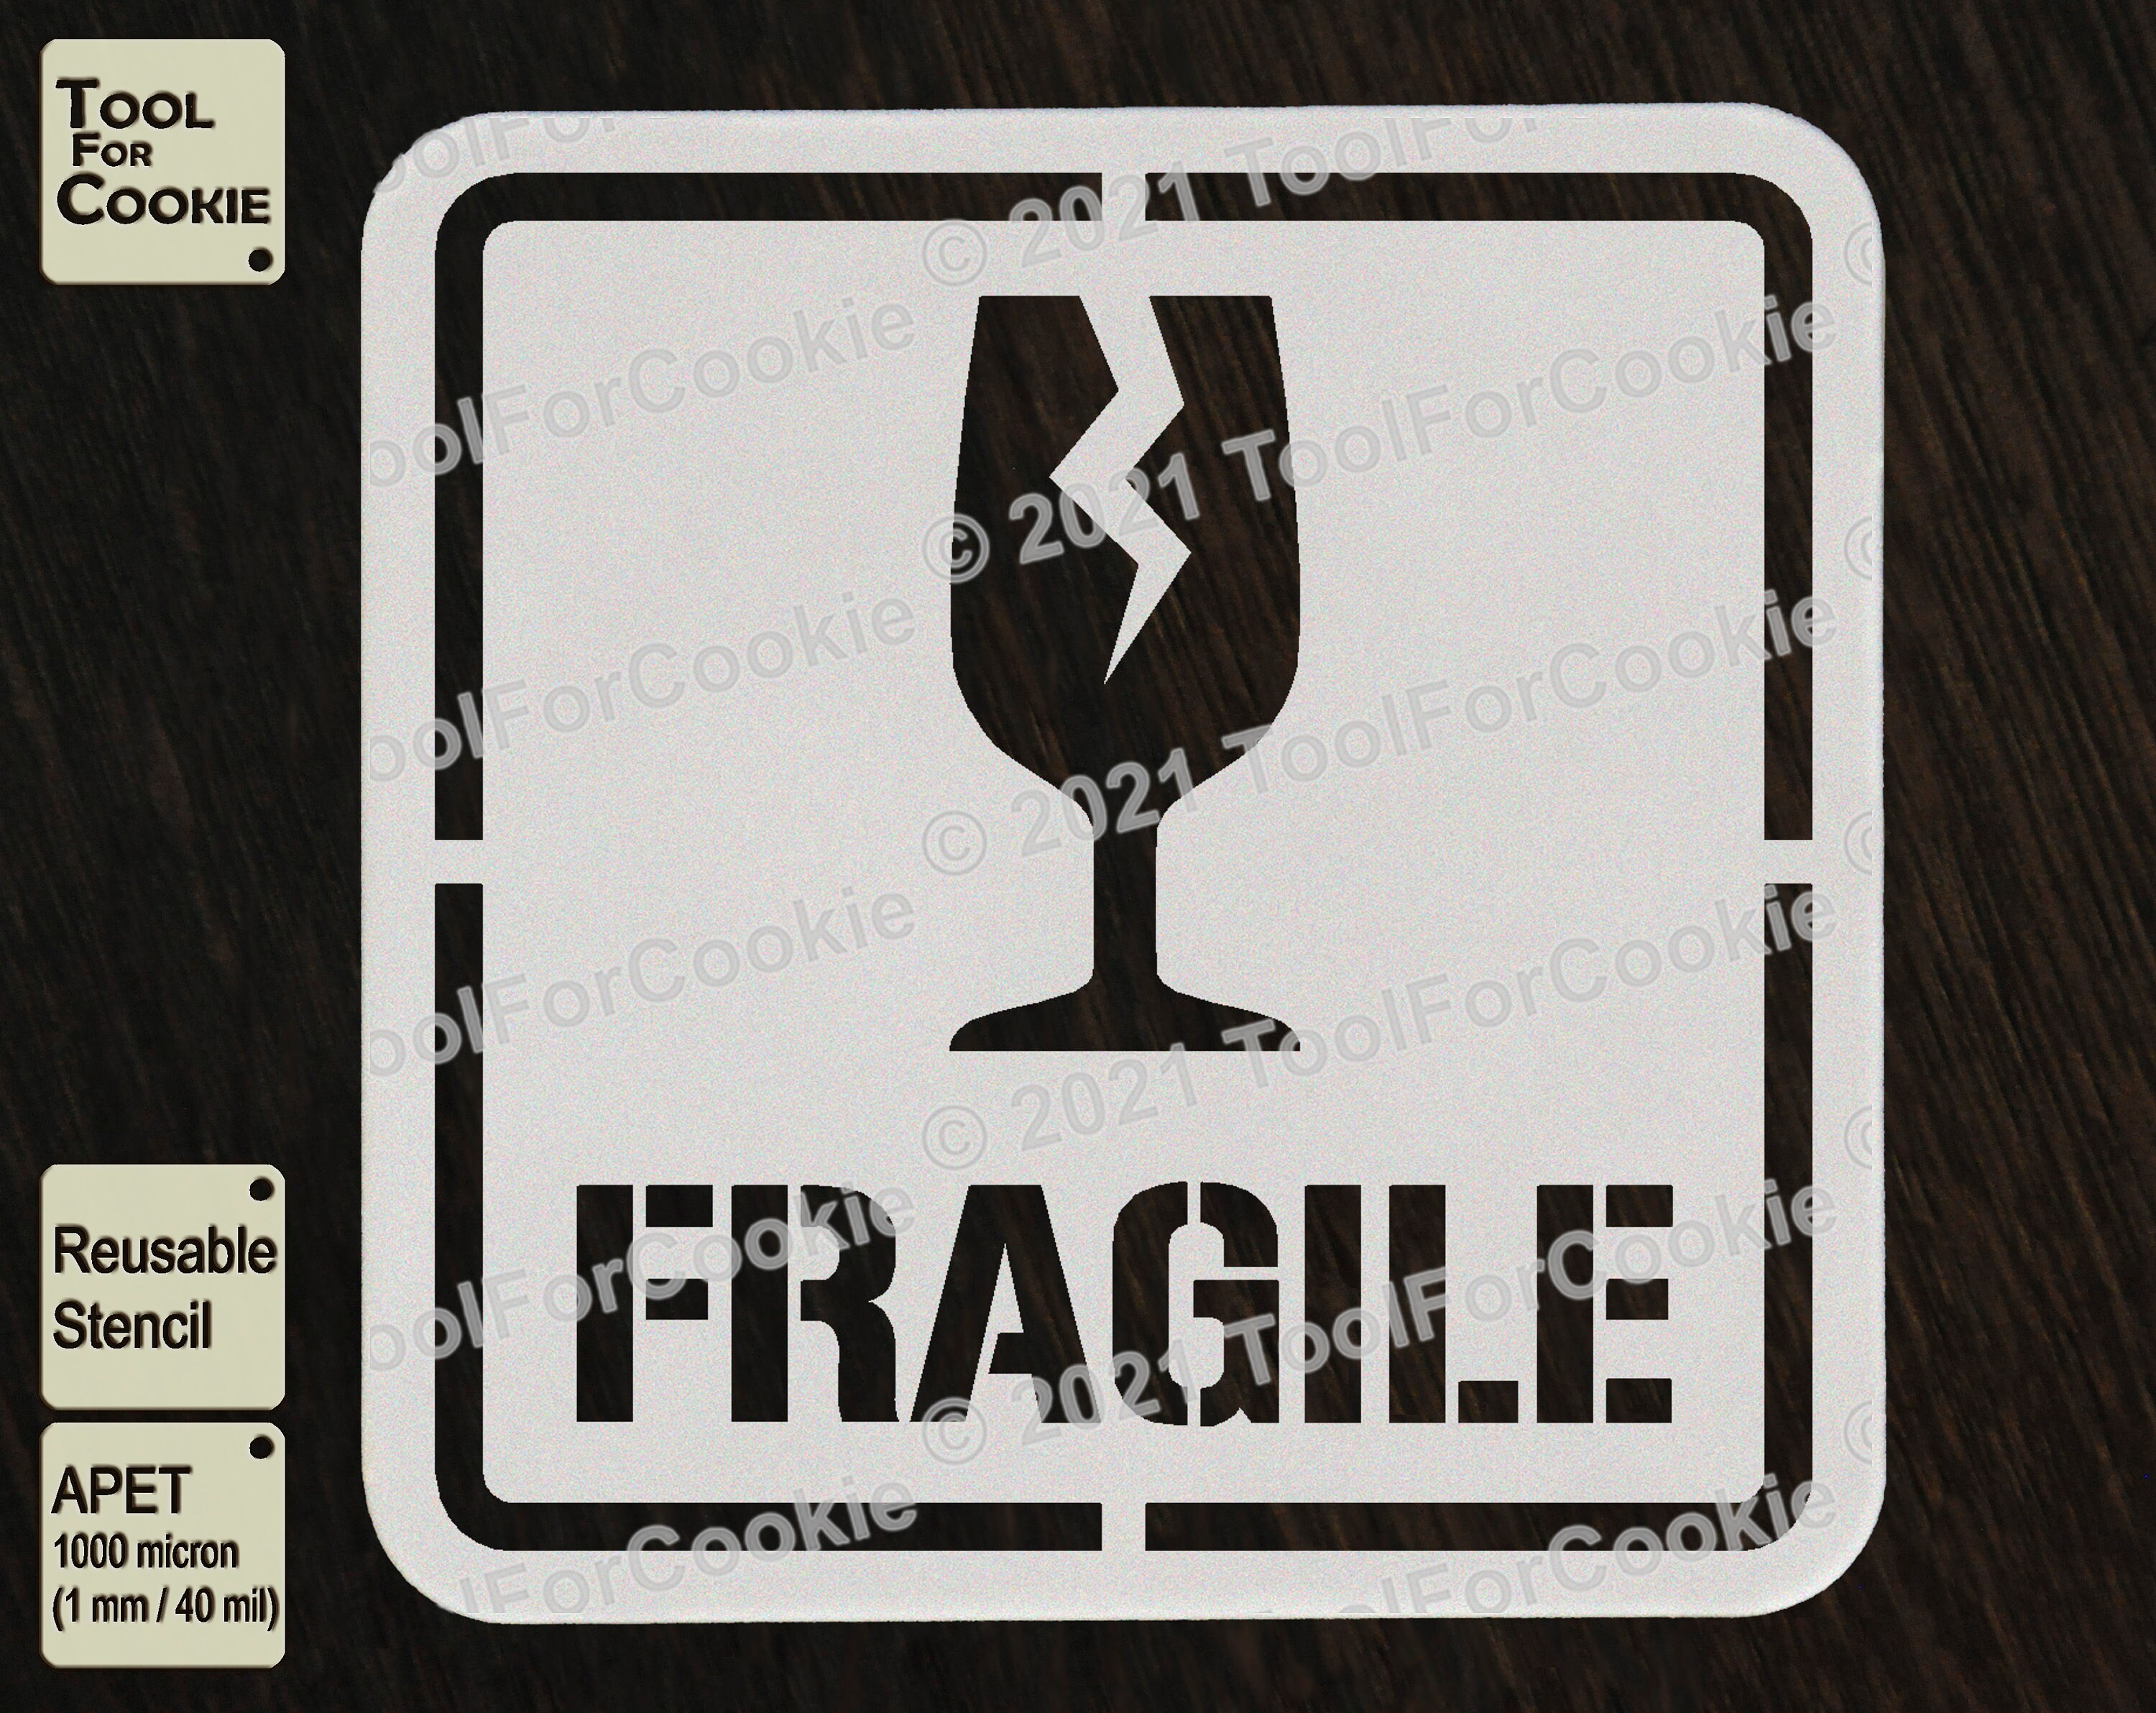 FRAGILE Stencil Box Marking Spray paint Stencil for boxes warning sign  Reusable